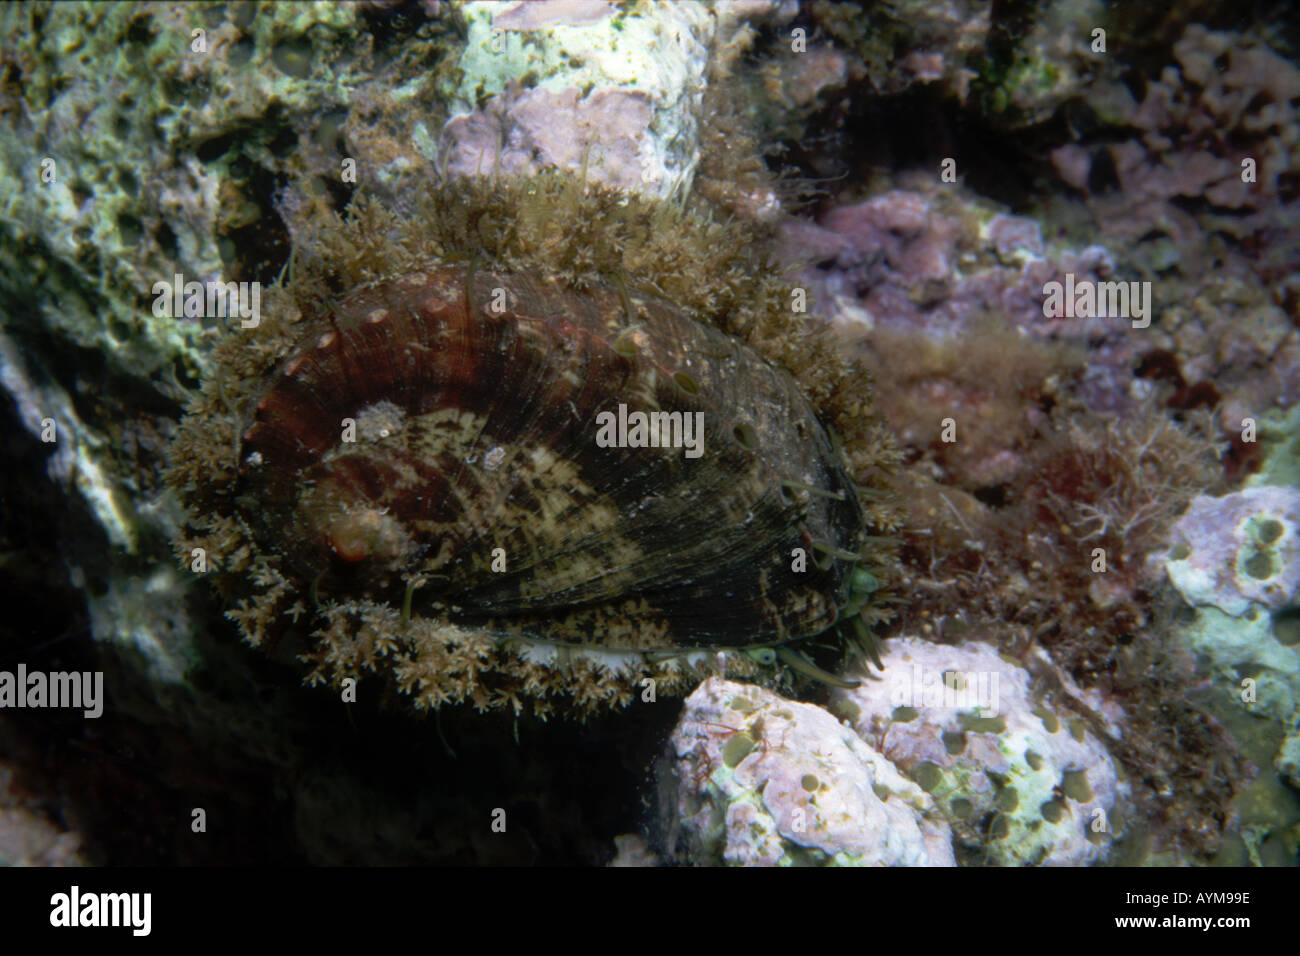 Green Ormer mediterranean abalone Haliotis tuberculata clinging to a rock with appendages and eyes visible Stock Photo